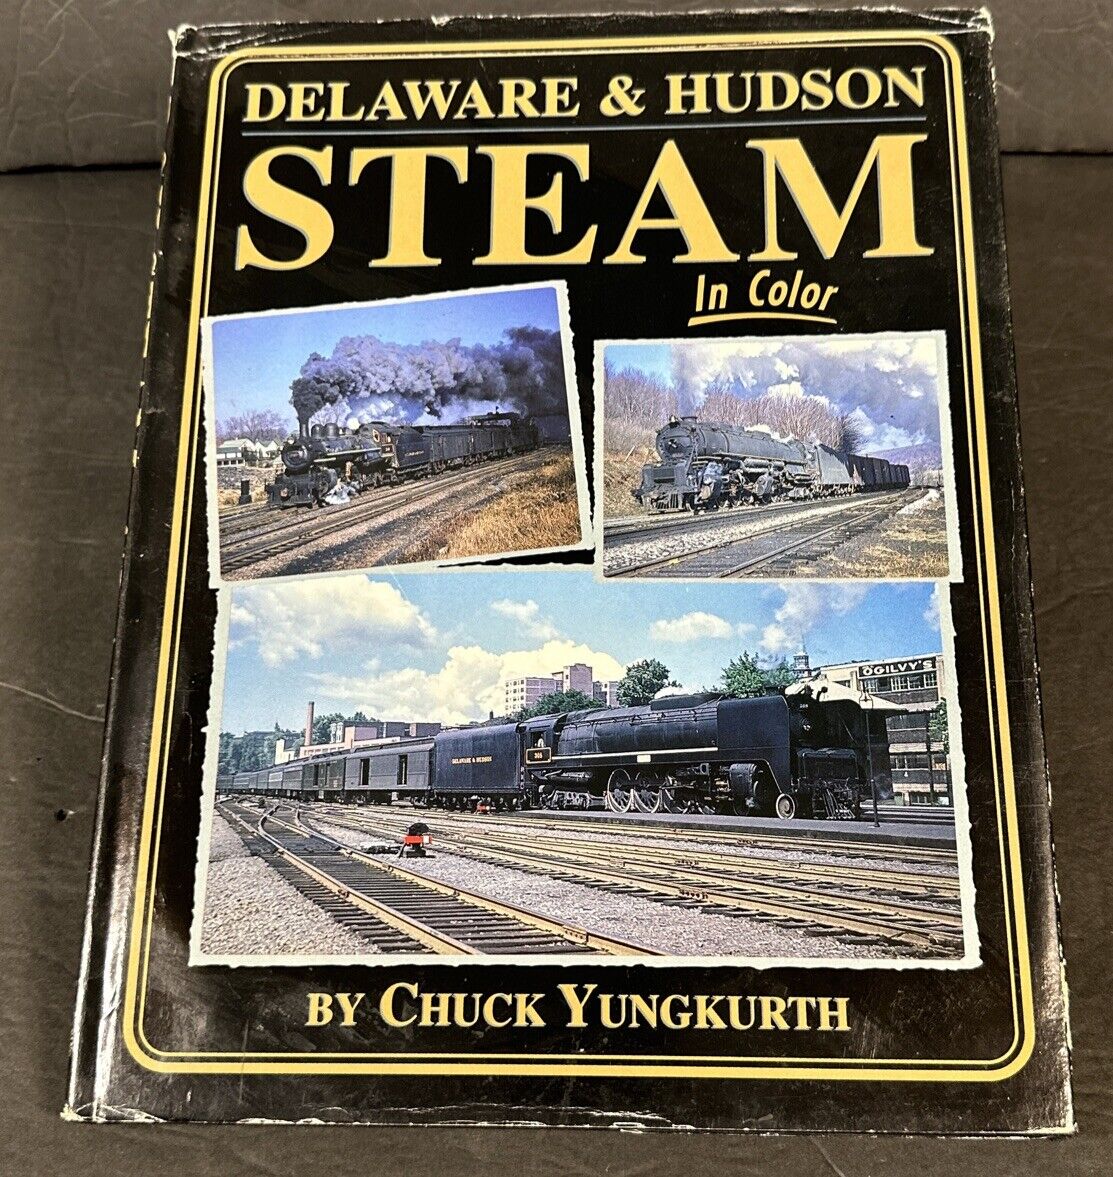 Delaware & Hudson Steam In Color by Chuck Yungkurth Morning Sun Books